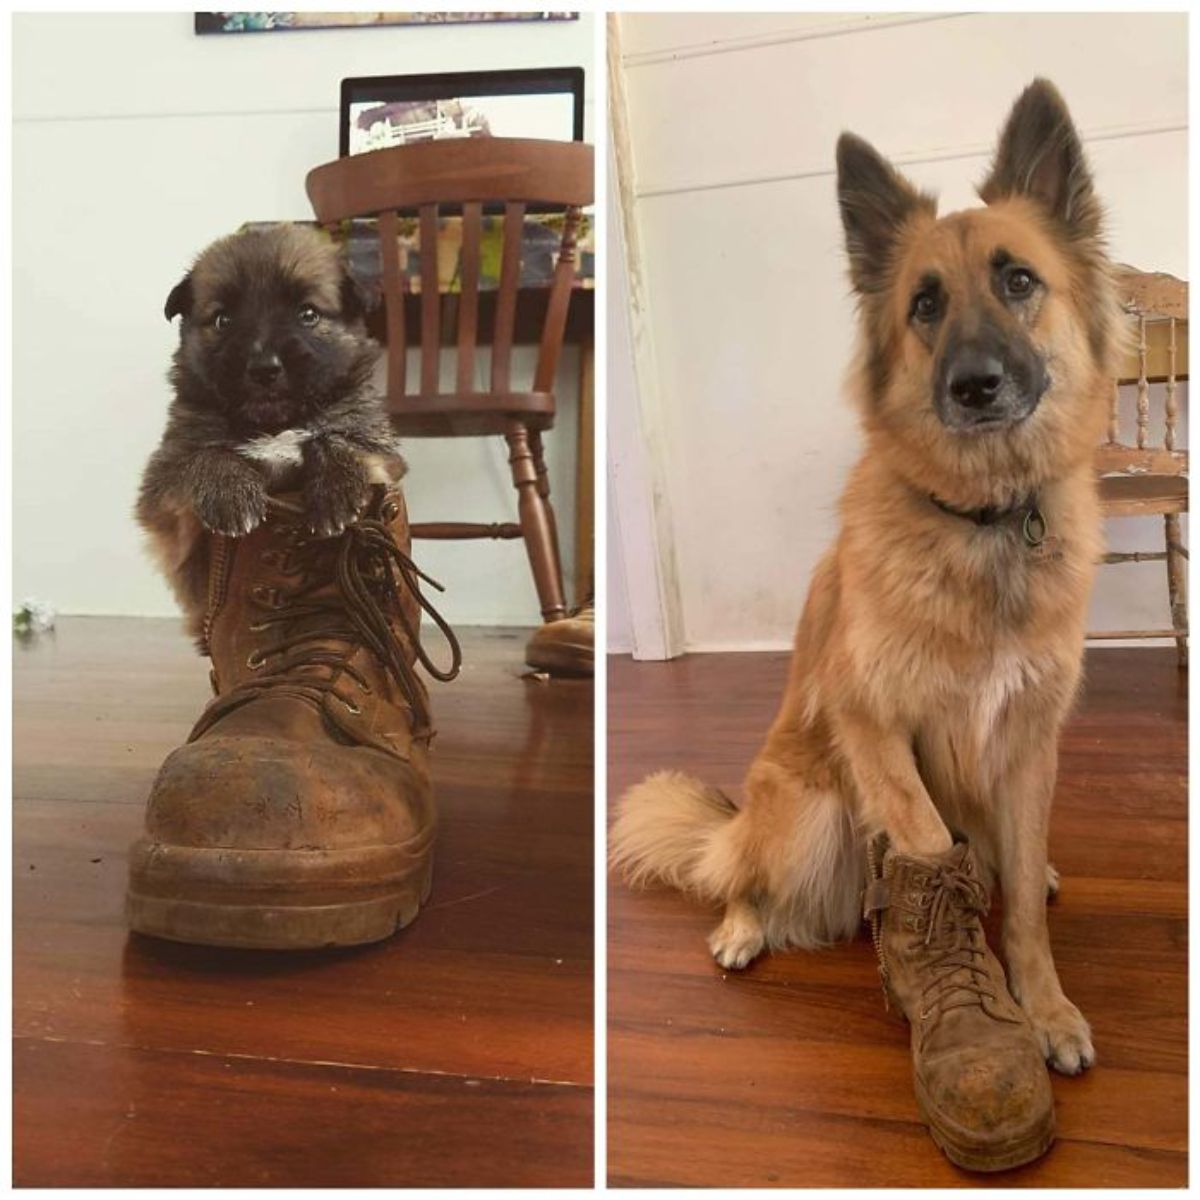 1 photo of a german shepherd puppy with the bottom half of the body inside a brown boot and 1 photo of the same dog grown with 1 paw inside the same boot